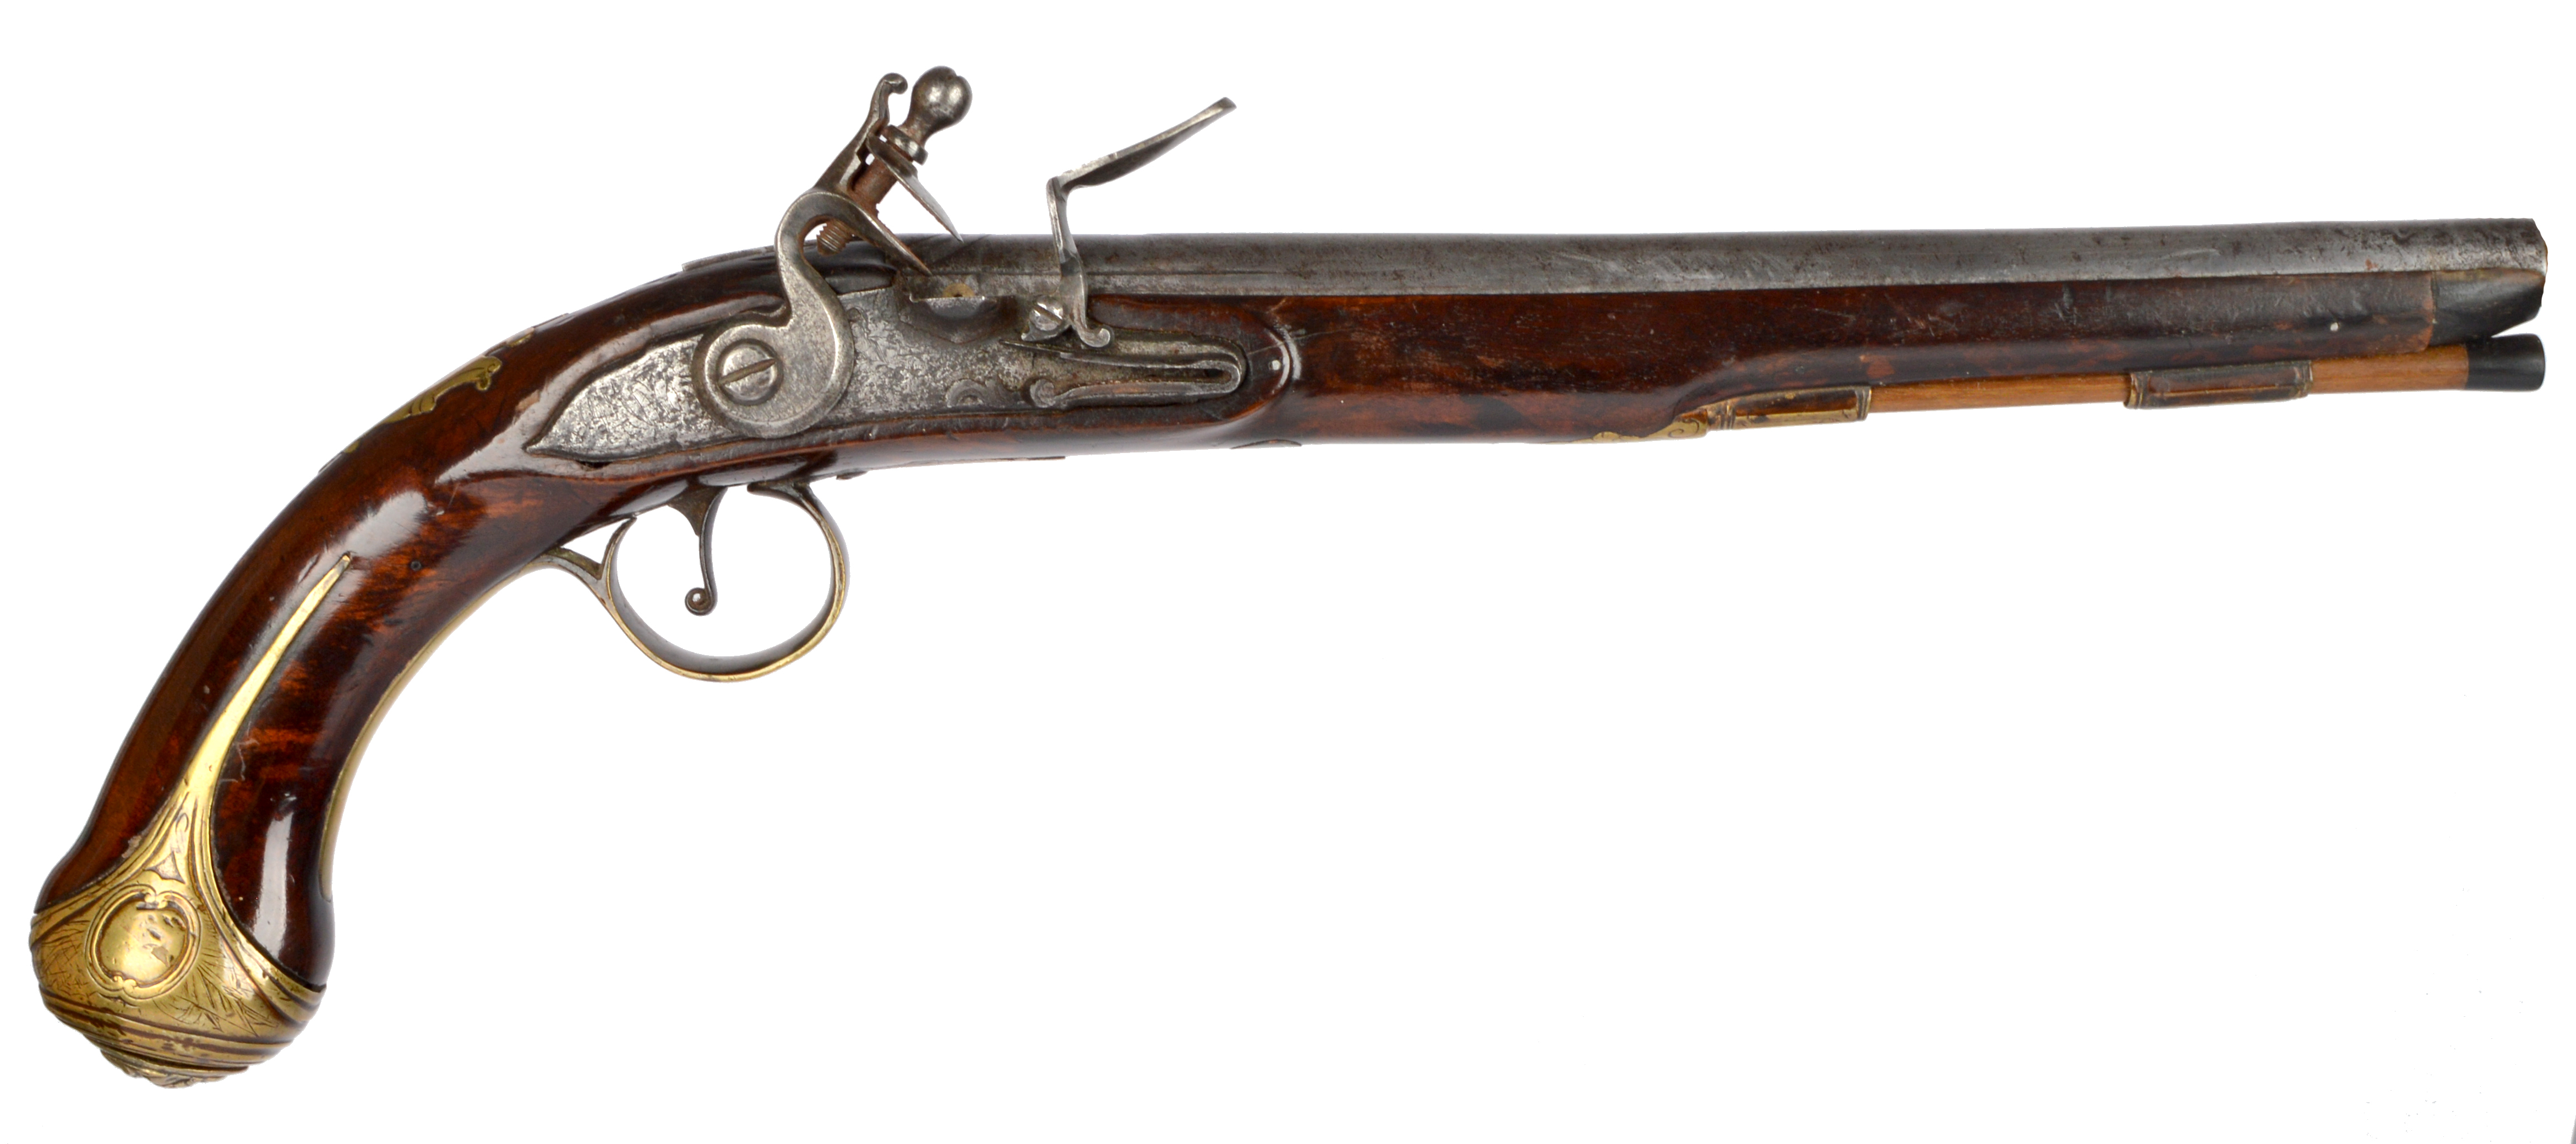 A 19th century flintlock pistol, 24 bore barrel 12 in., lock plate with stepped profile and engraved